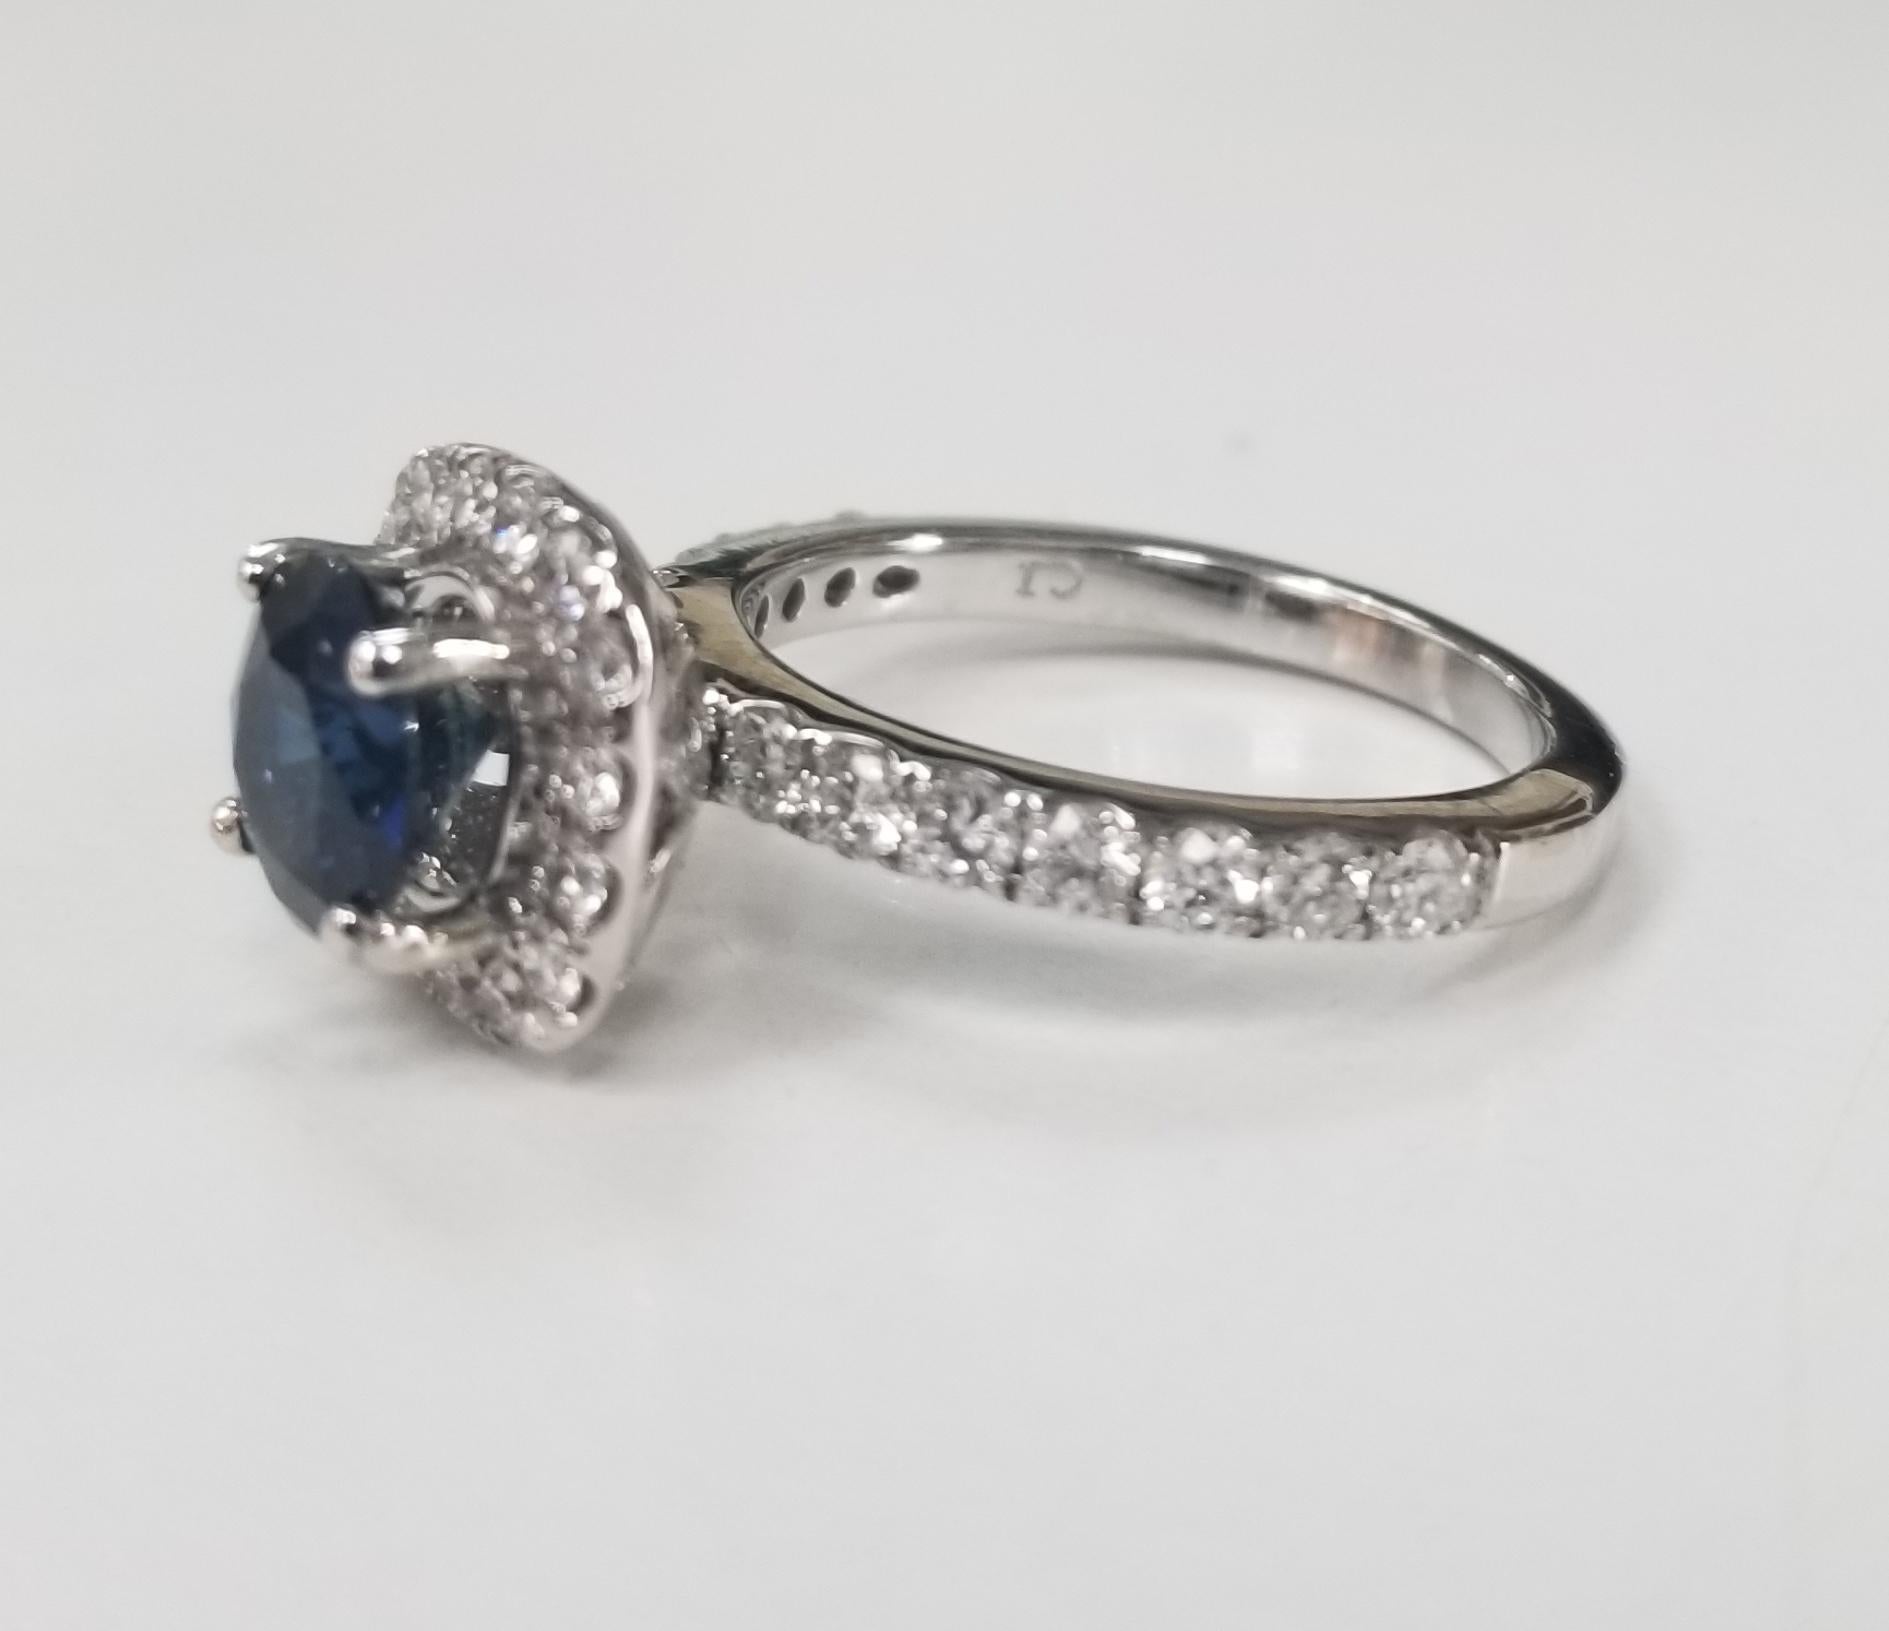 14k white gold blue sapphire and diamond halo ring, containing 1 round blue sapphire of gem quality weighing 1.50cts. and with 30 round full cut diamonds of very fine quality weighing .50pts. ring size is 6 and can be sized to fit for free.